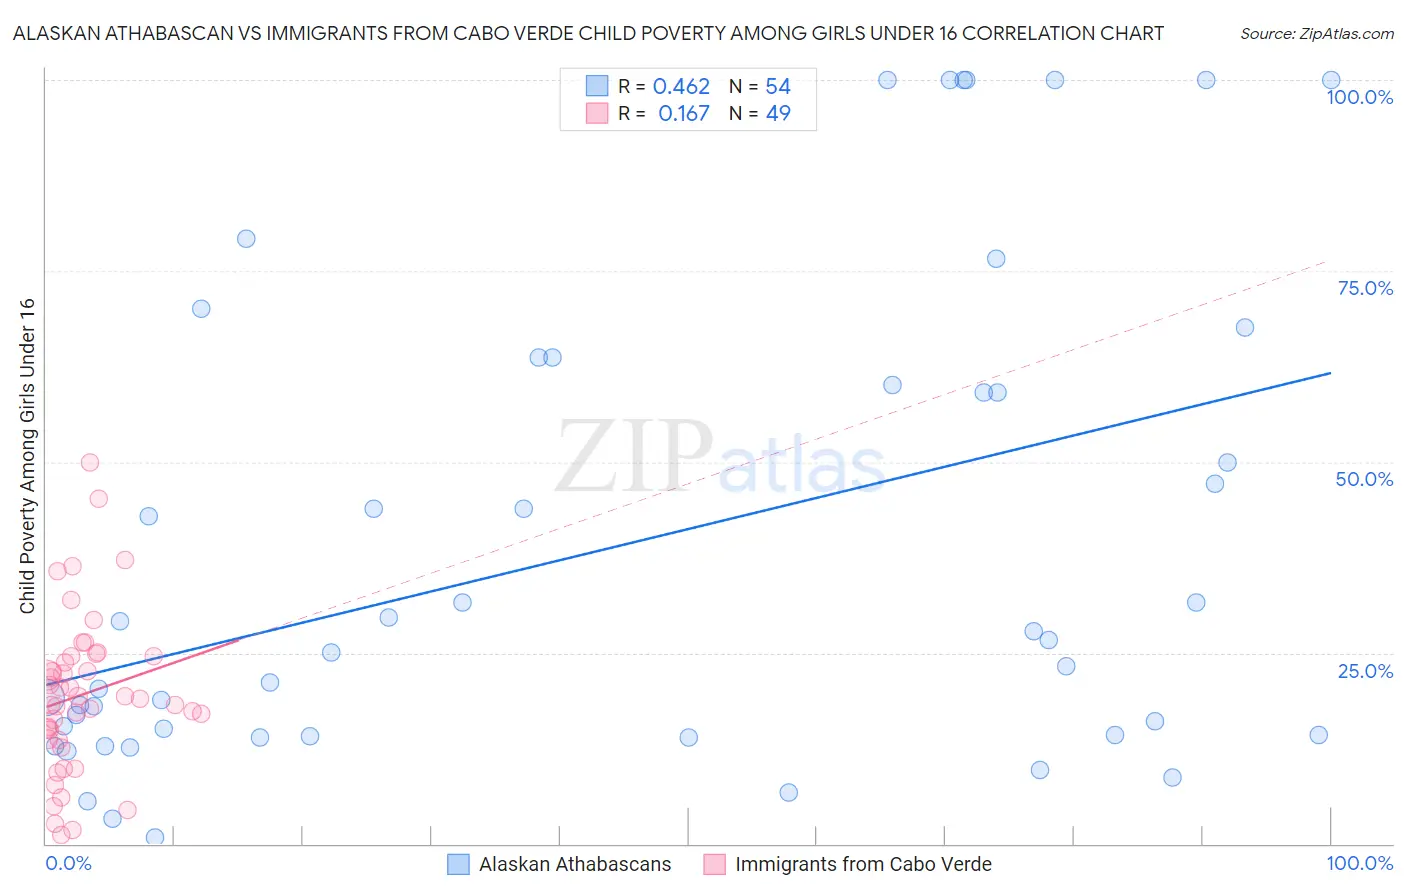 Alaskan Athabascan vs Immigrants from Cabo Verde Child Poverty Among Girls Under 16